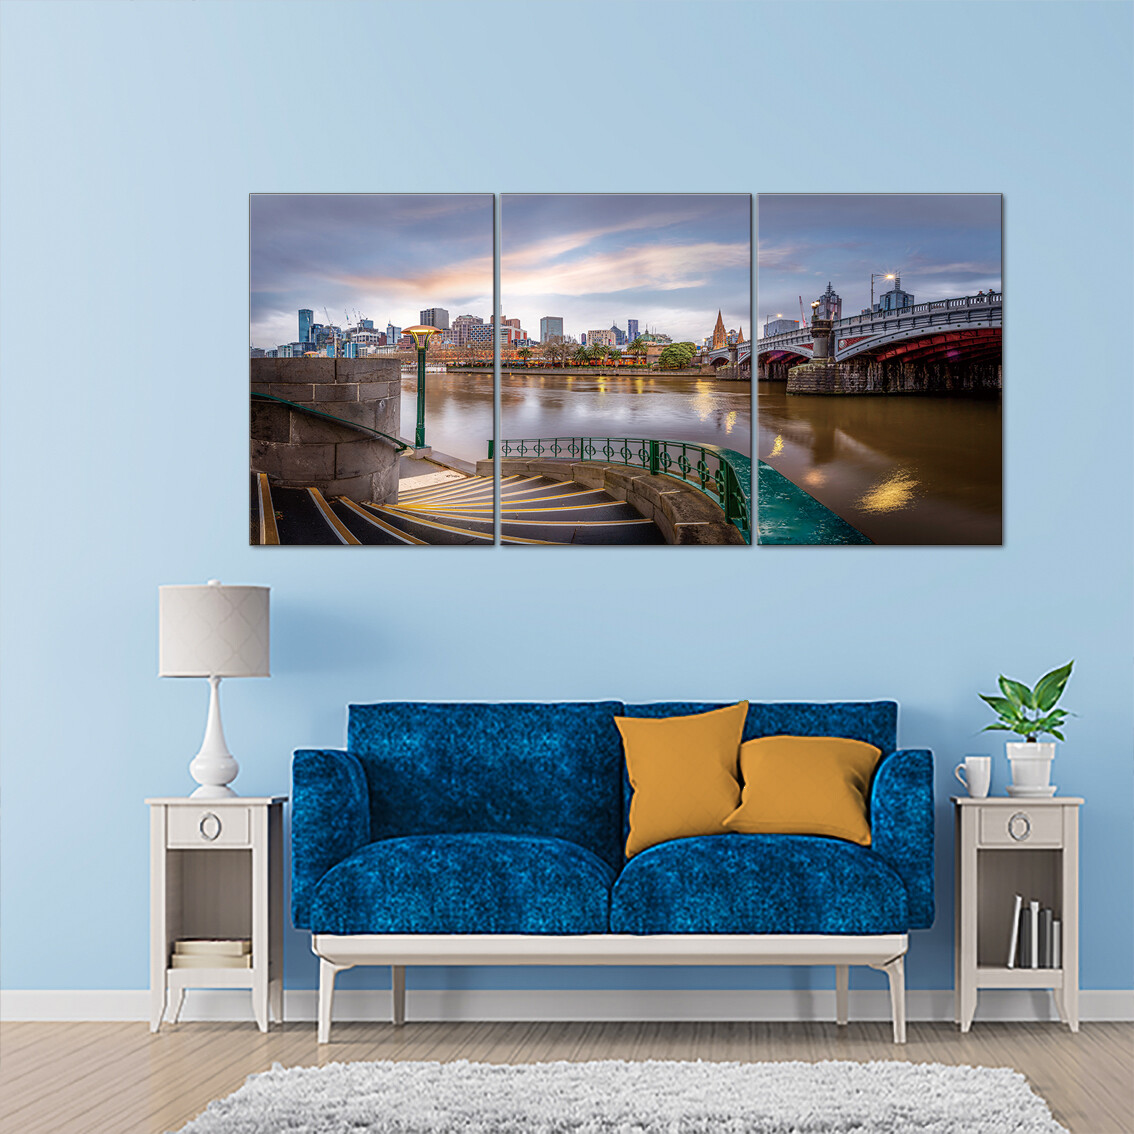 Melbourne Skyline (3 Panels) - Modern Luxury Wall art Printed on Acrylic Glass - Frameless and Ready to Hang